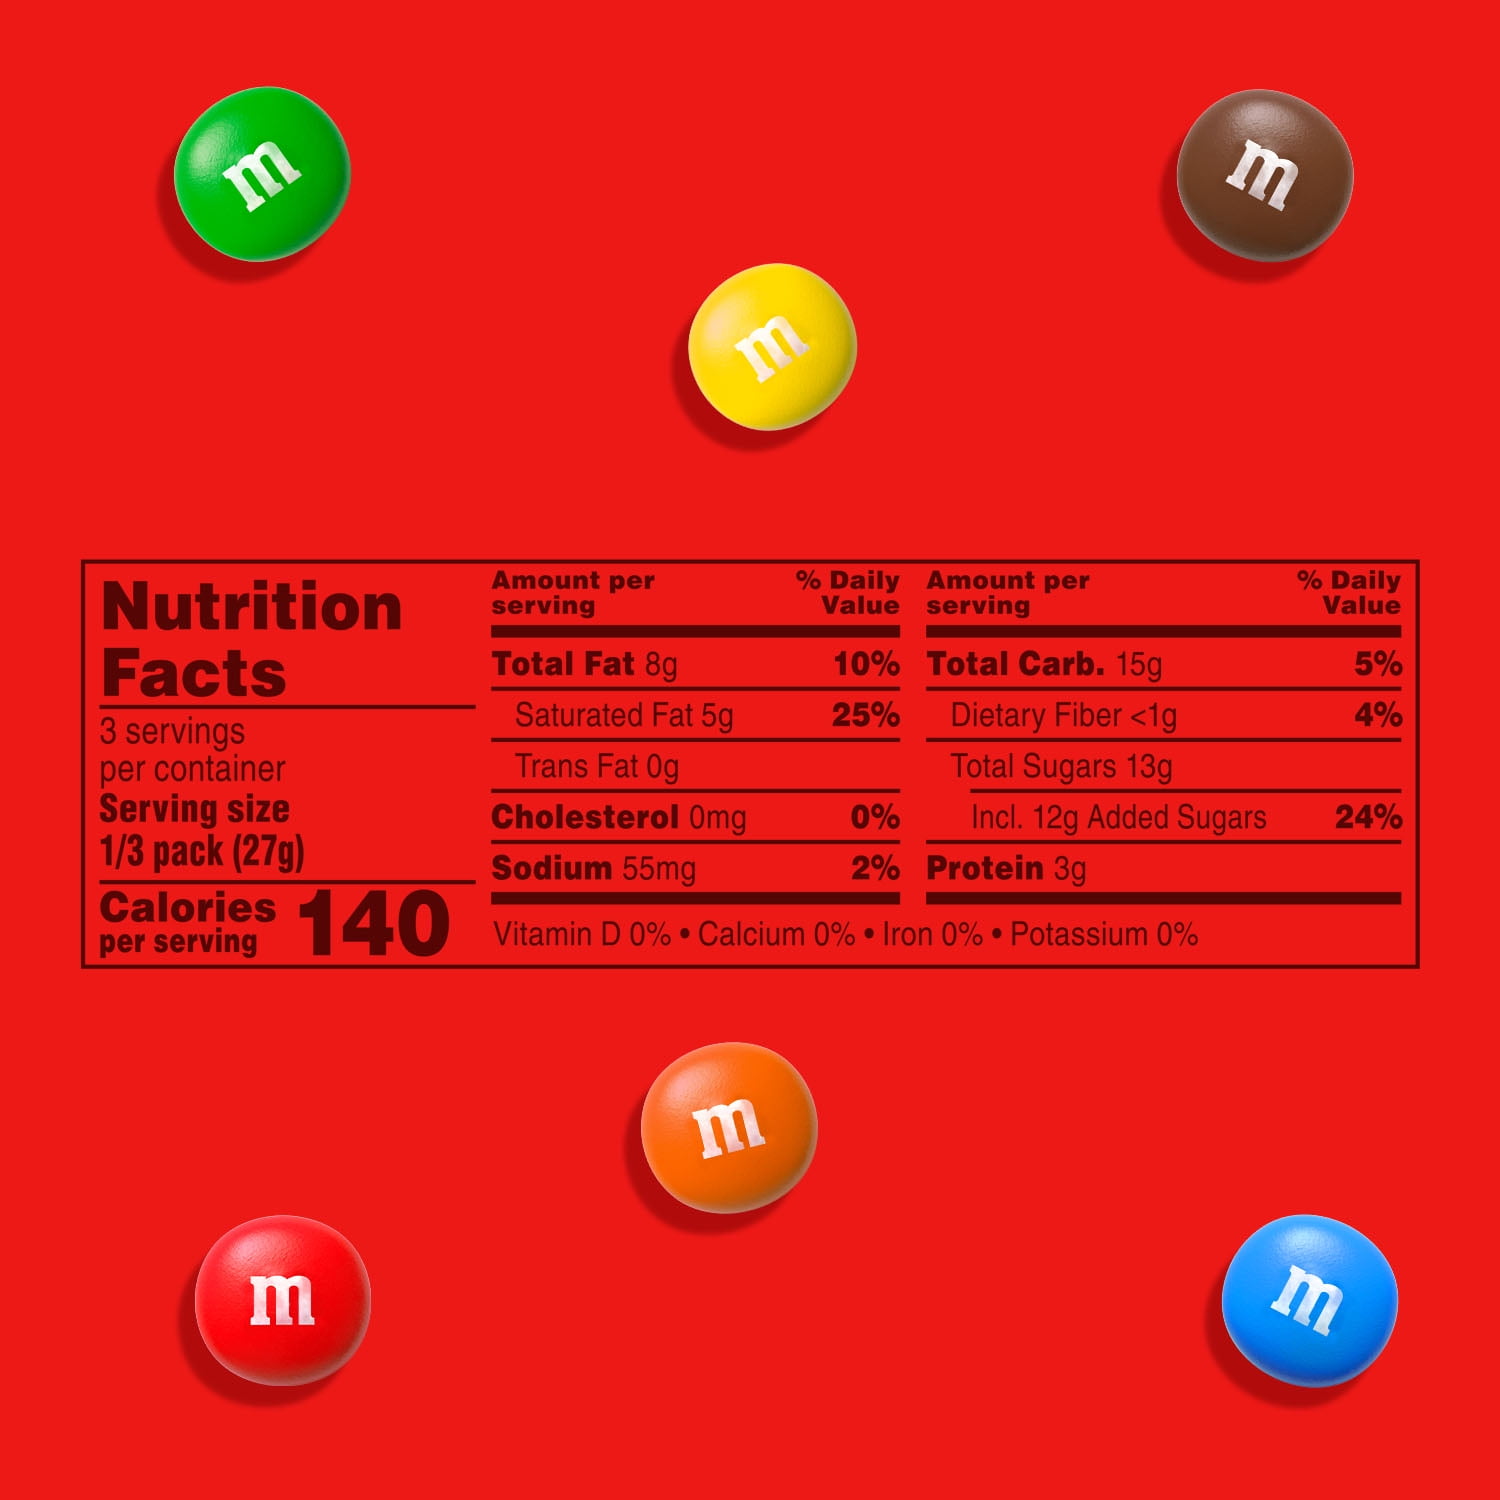 M&M's Chocolate Candies, Peanut Butter, Sharing Size, 2.83 oz. Bags (case  of 24), 24 count - Harris Teeter